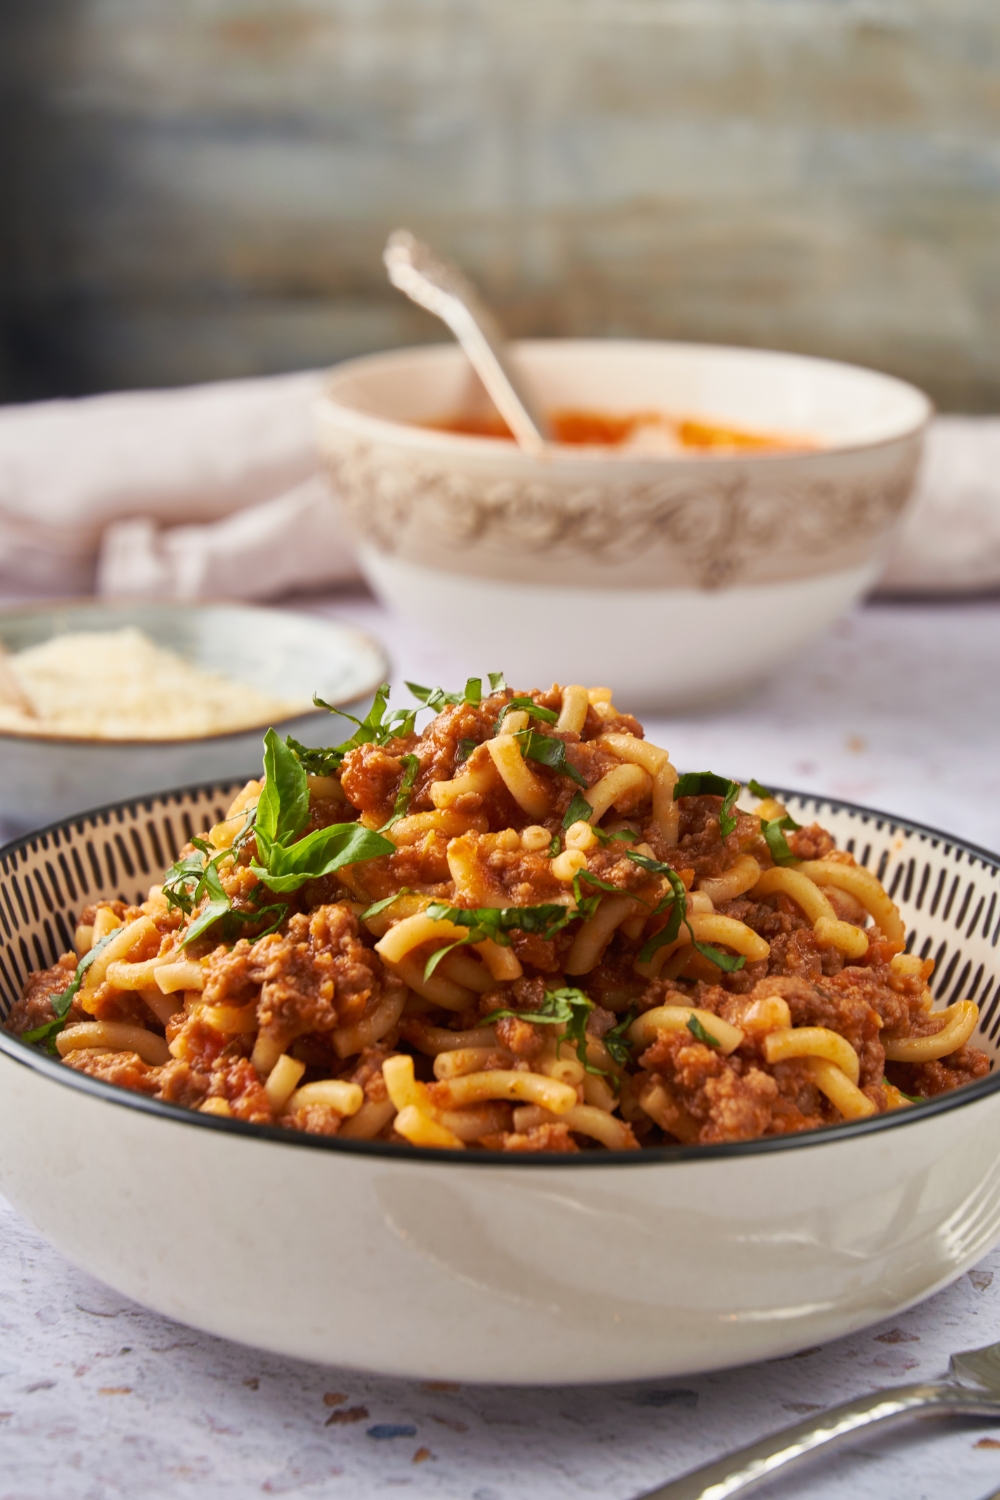 Beefaroni garnished with fresh green herbs and served in a decorative blue and white bowl.